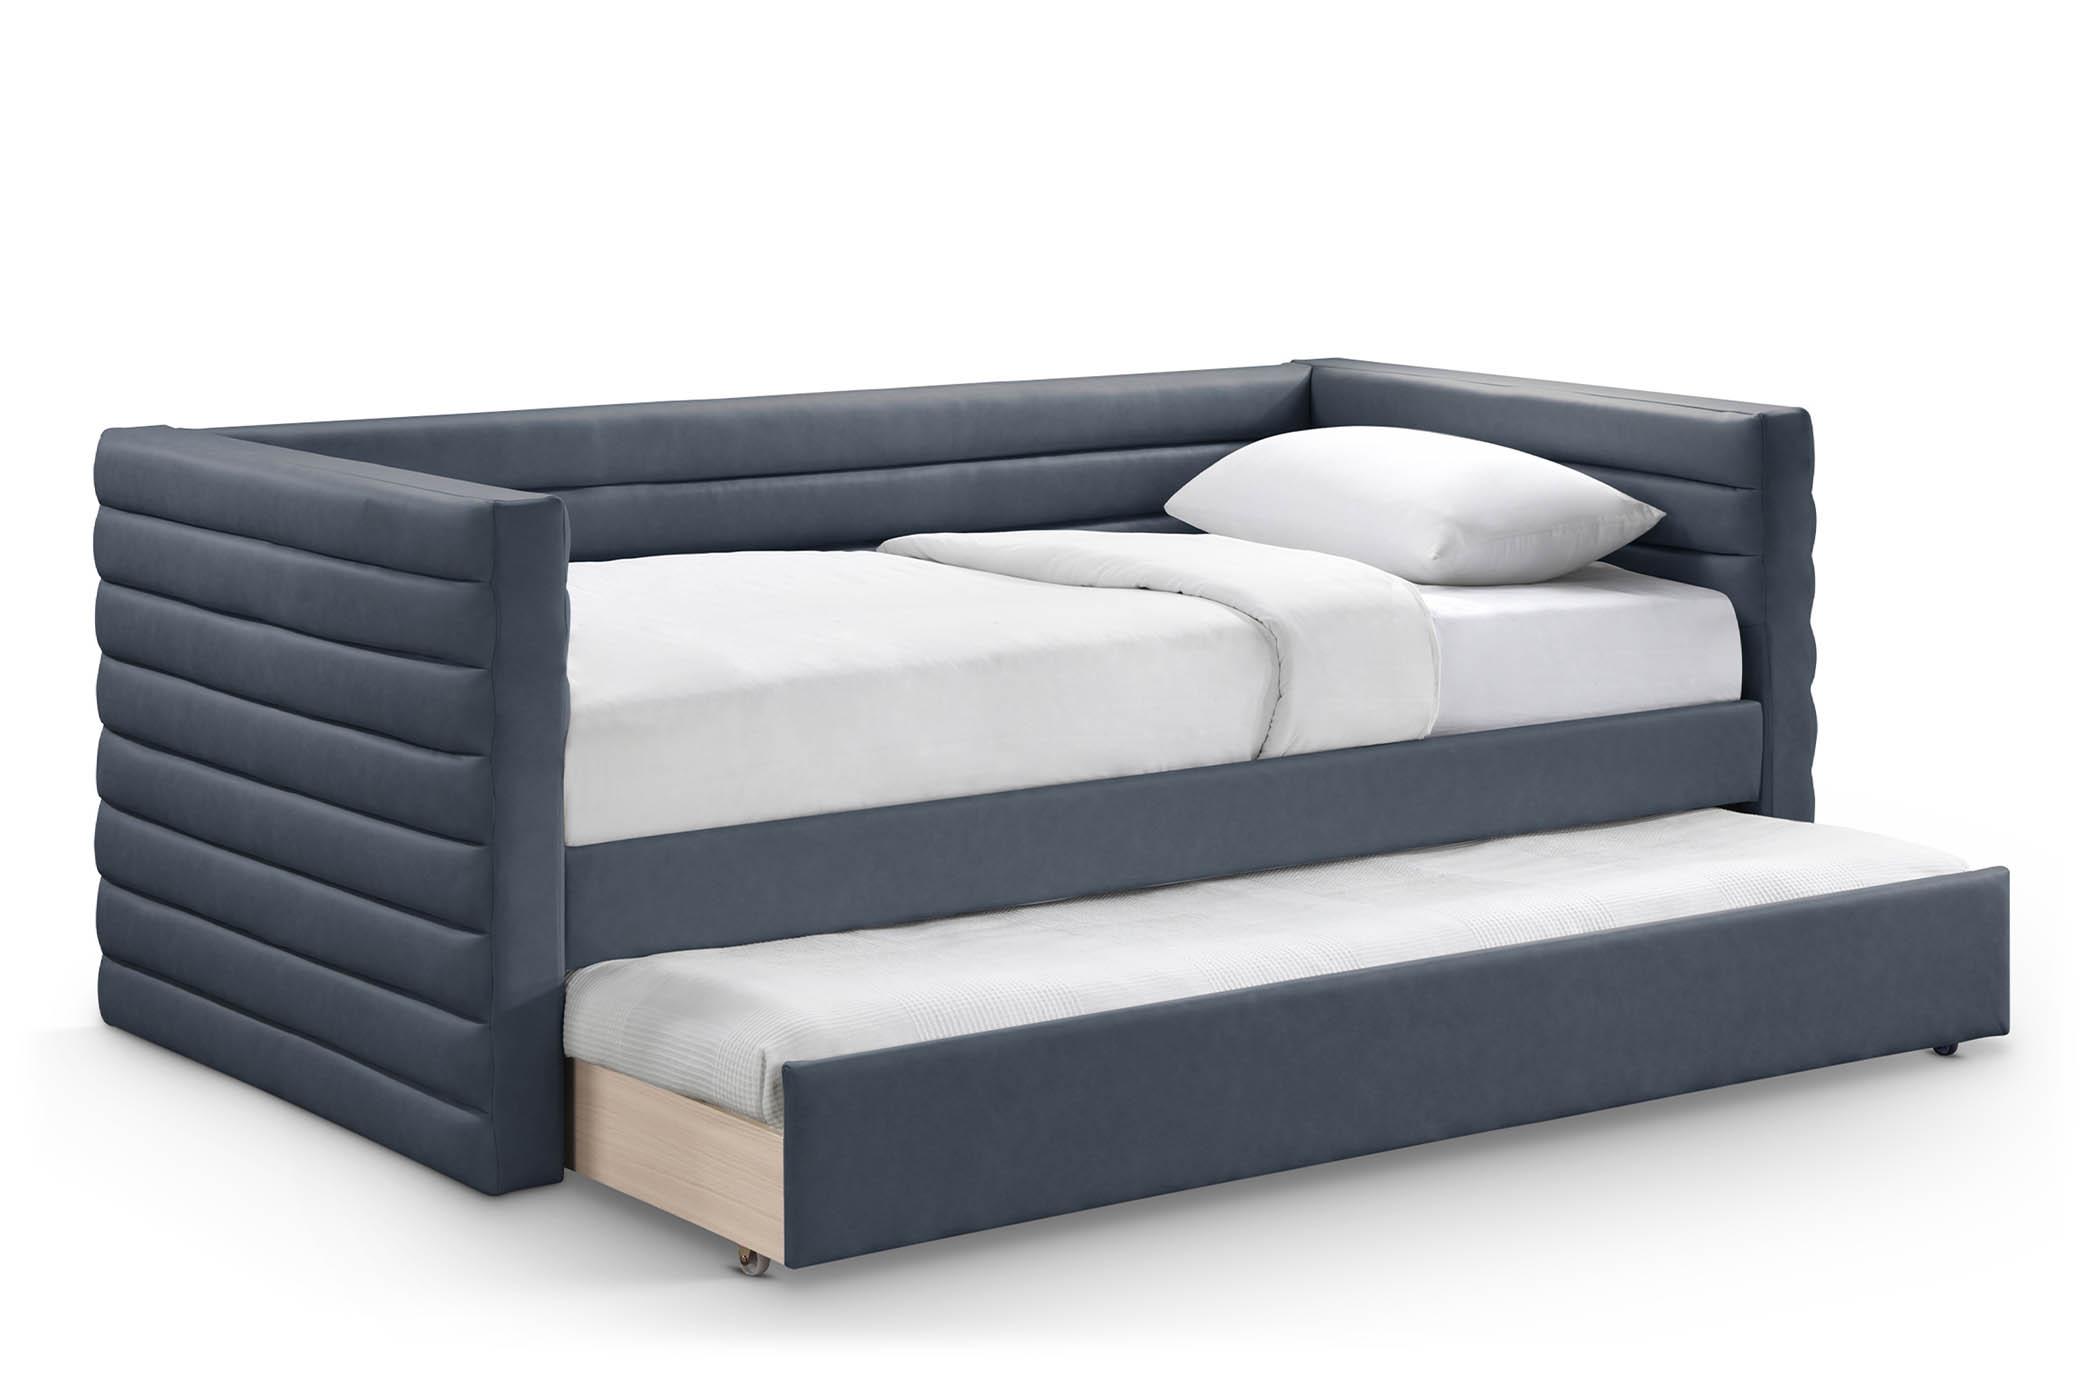 Meridian Furniture BeverlyNavy-T Daybed